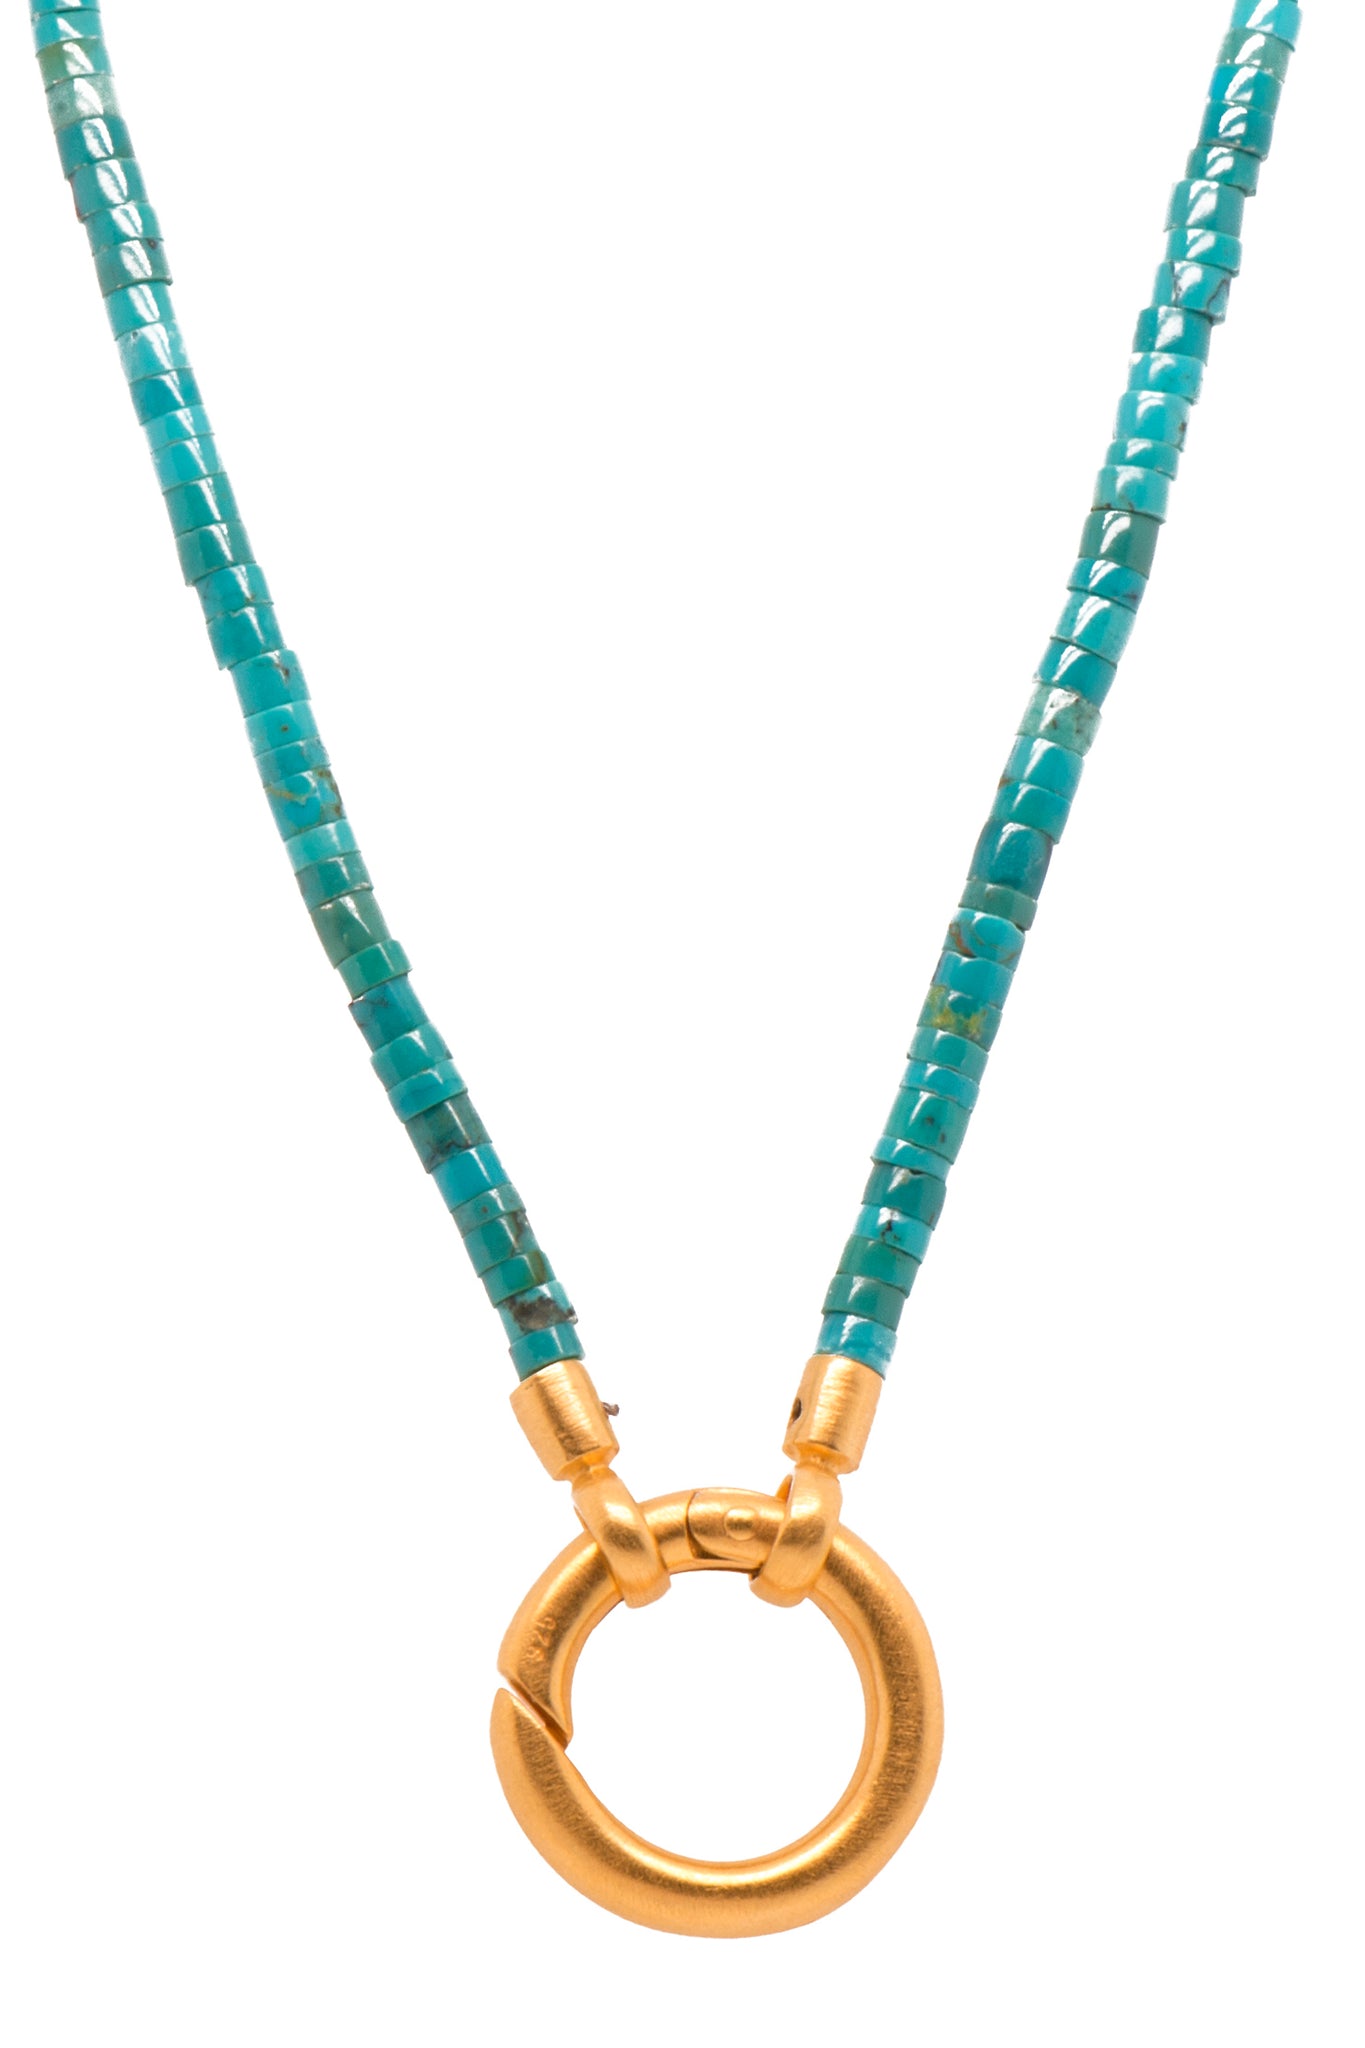 Turquoise Necklace 3mm With Ring Clasp 24K Fair Trade Gold Vermeil 17"